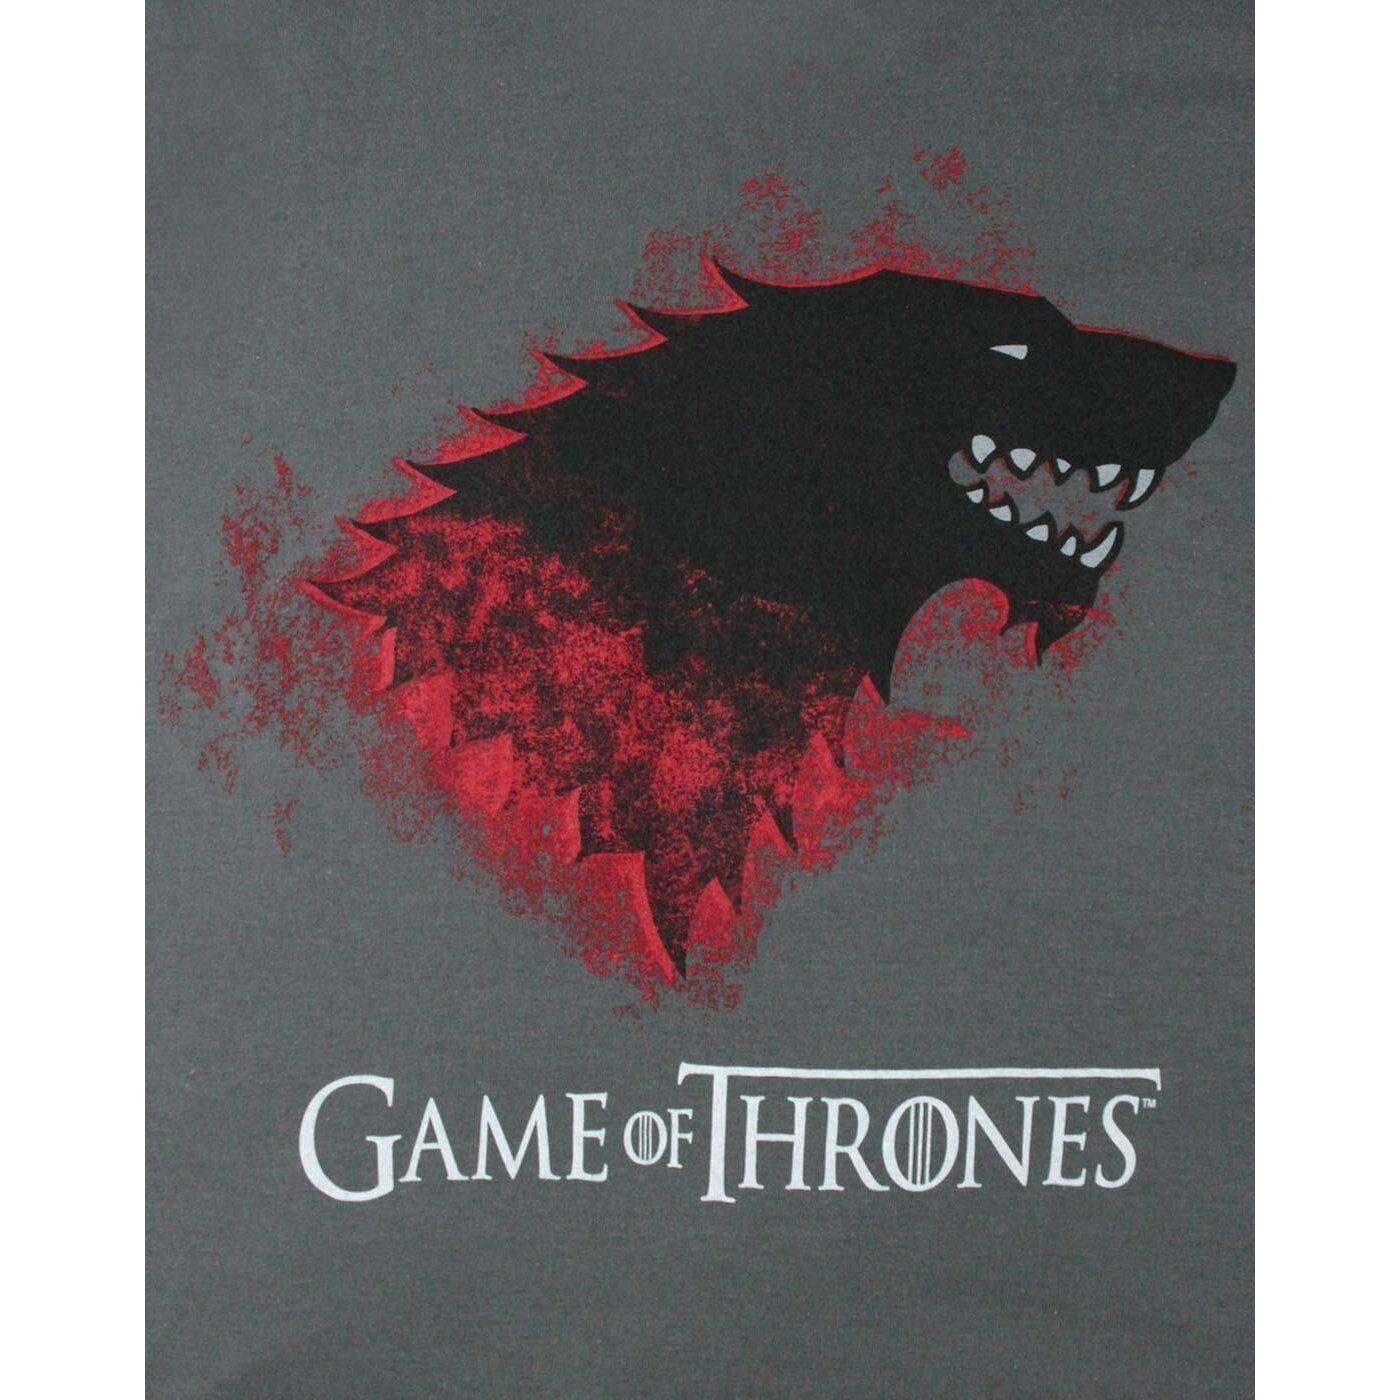 Game of Thrones  T-shirt 